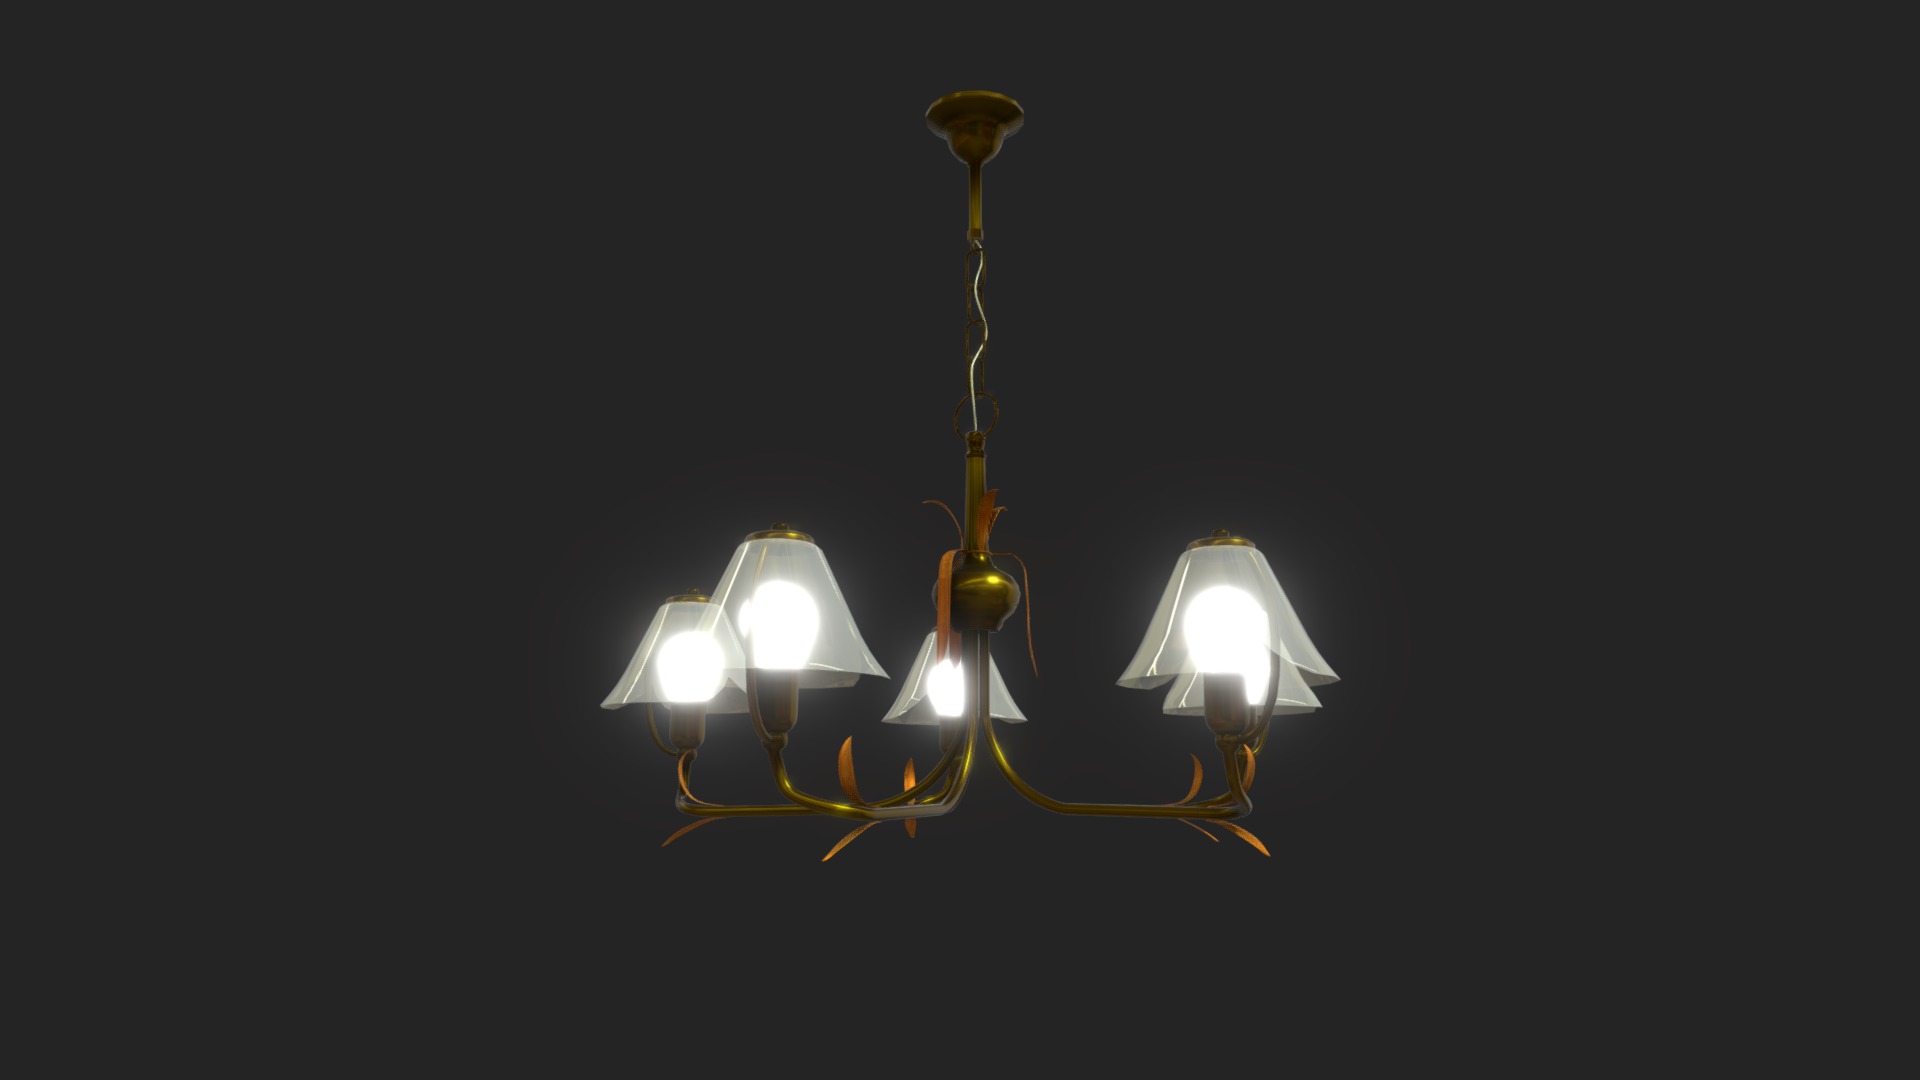 3D model HGPRGO263 - This is a 3D model of the HGPRGO263. The 3D model is about a chandelier with lights.